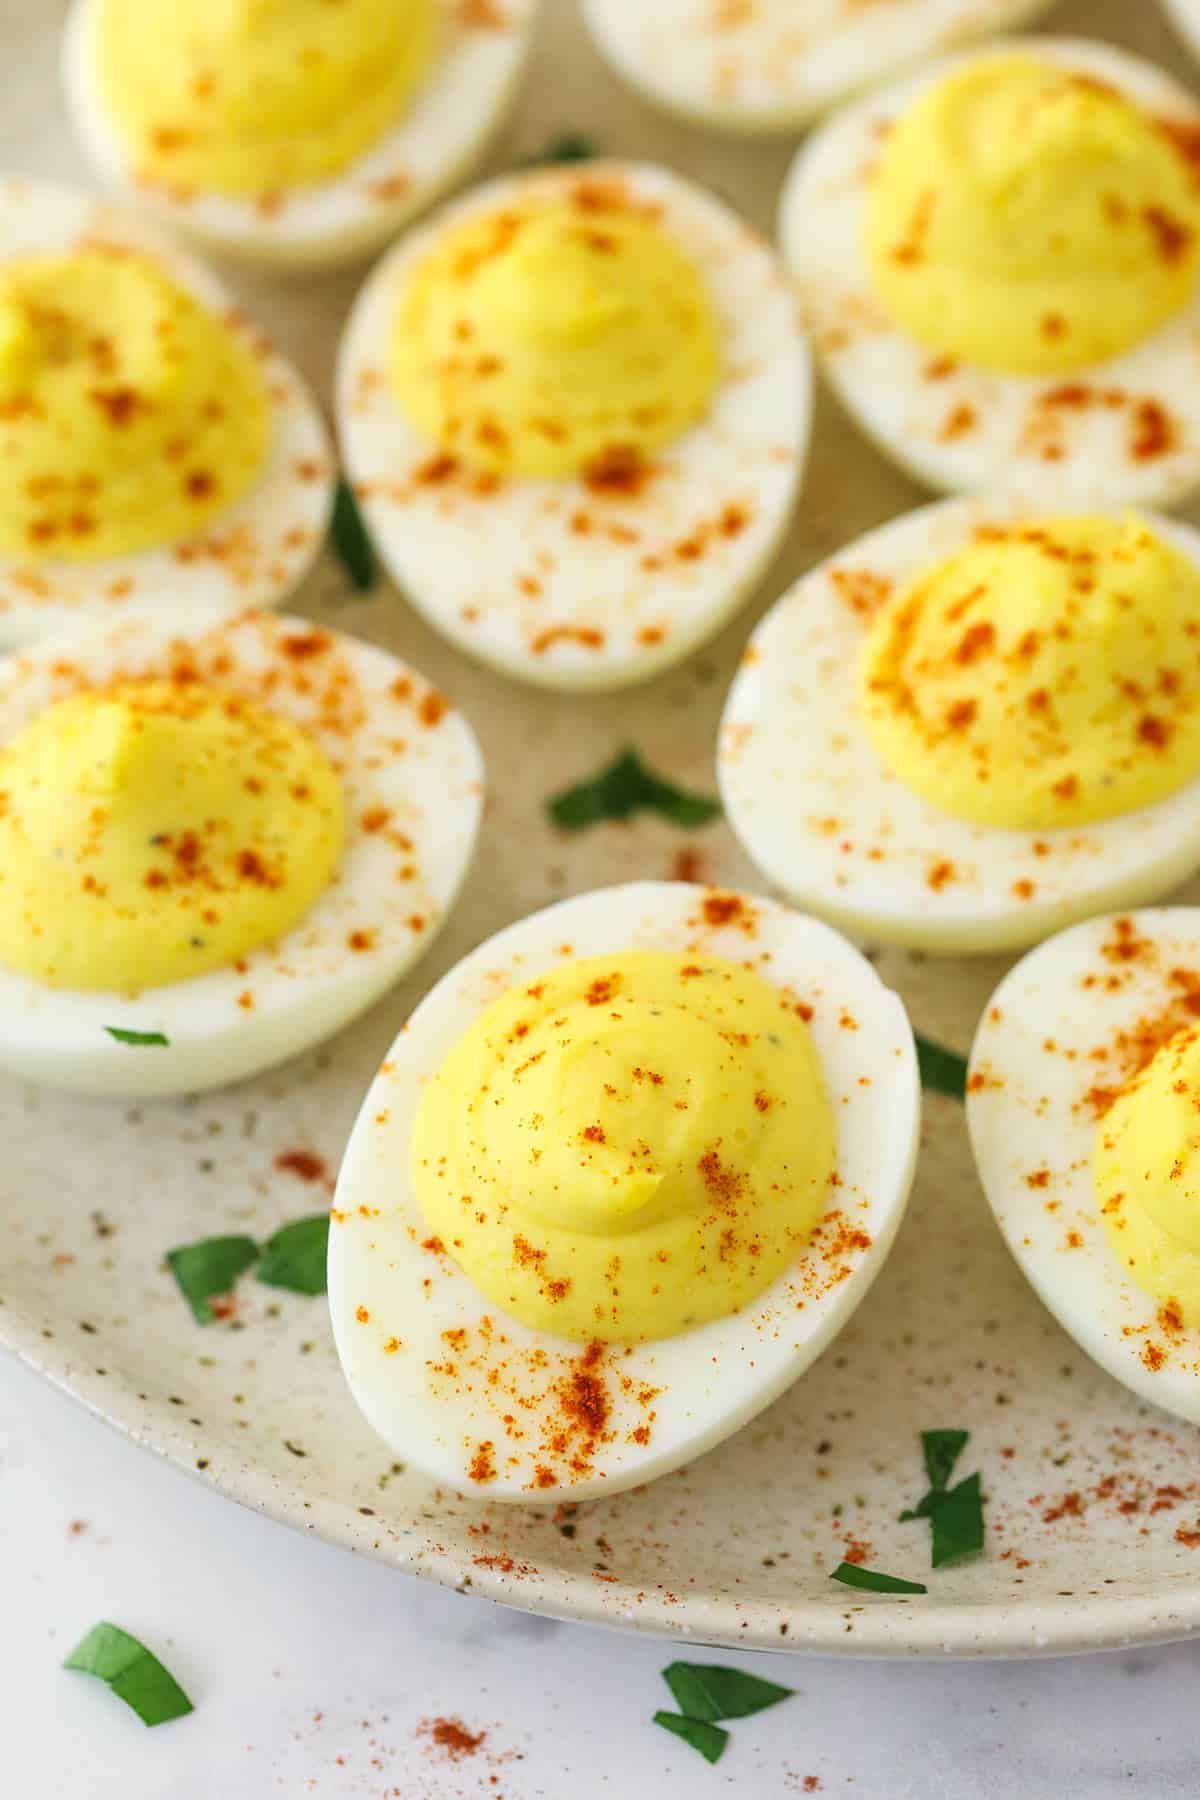 Deviled eggs on a serving plate.